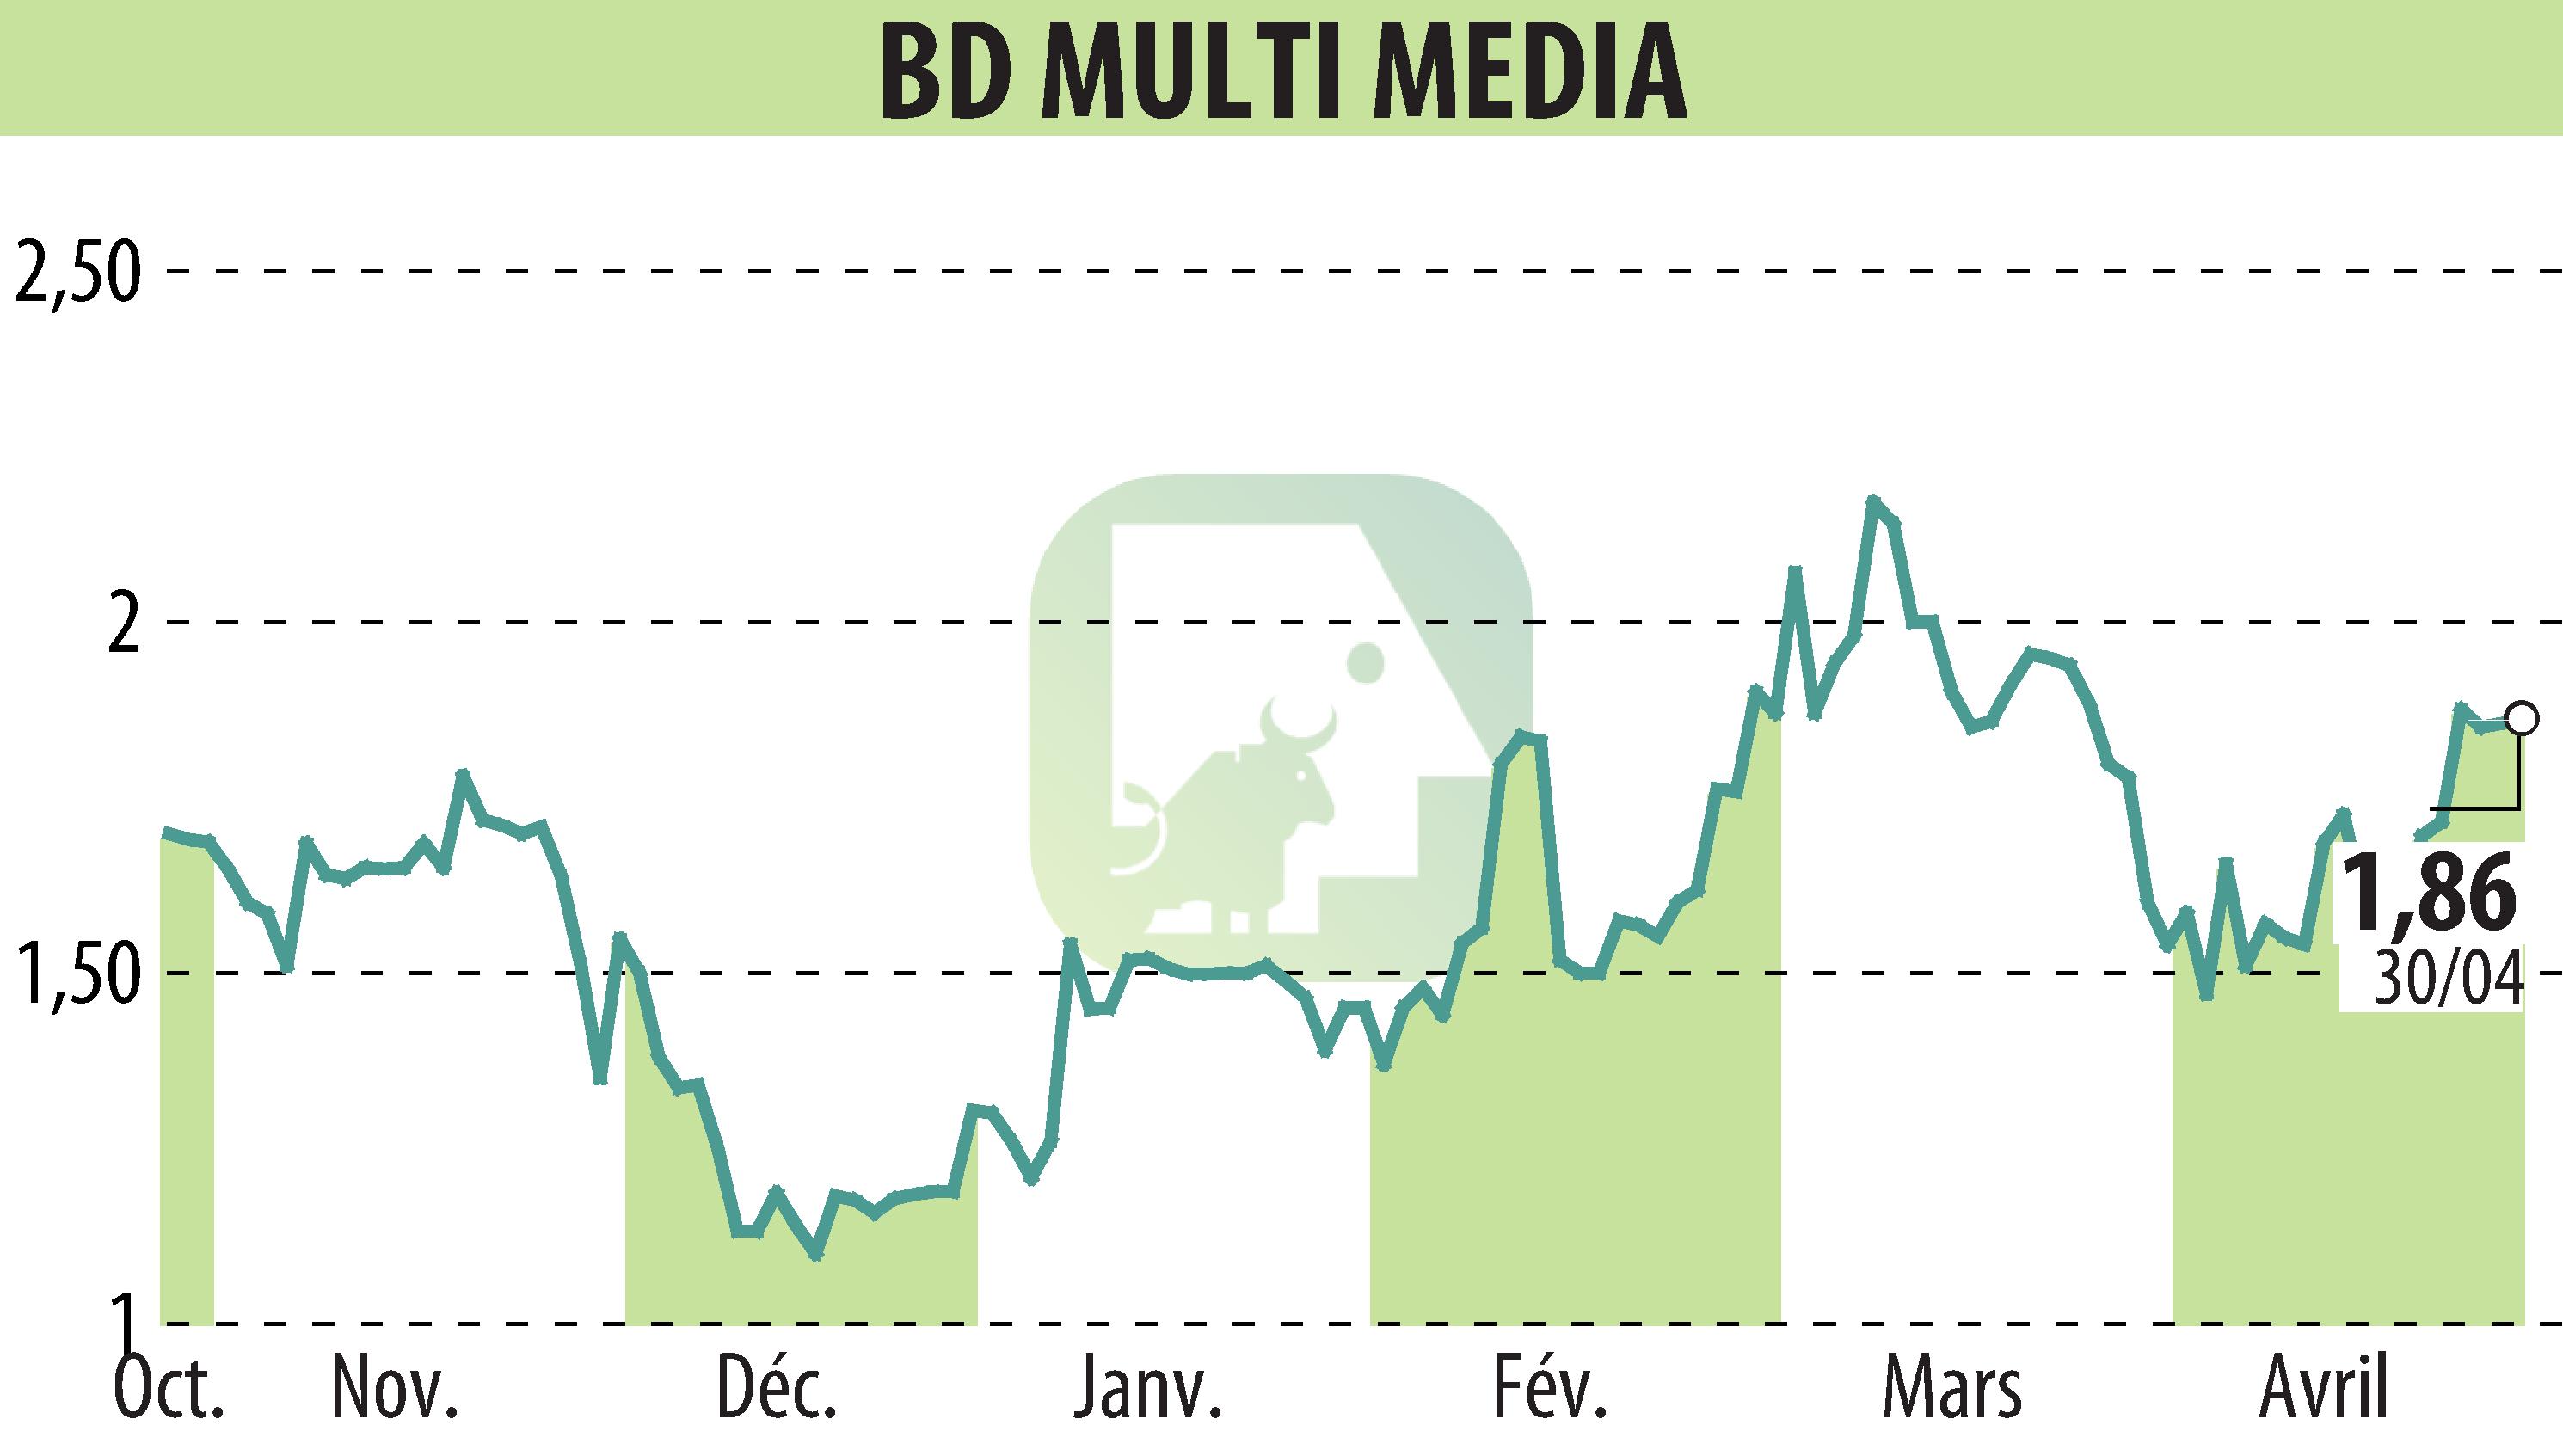 Stock price chart of BD MULTI MEDIA (EPA:ALBDM) showing fluctuations.